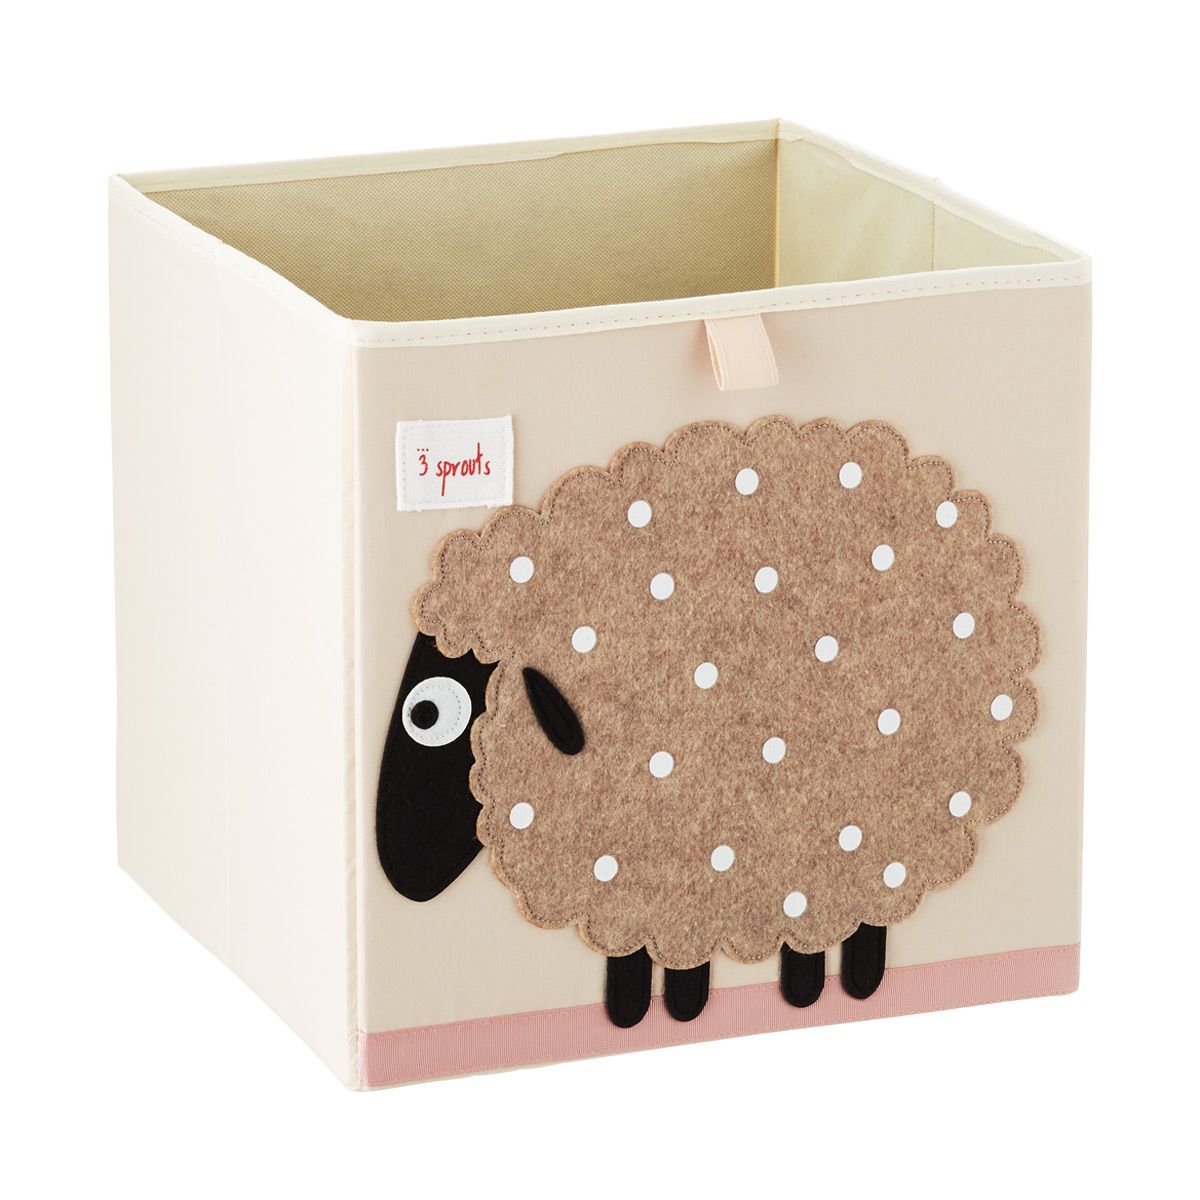 Sheep Toy Storage Cube | The Container Store